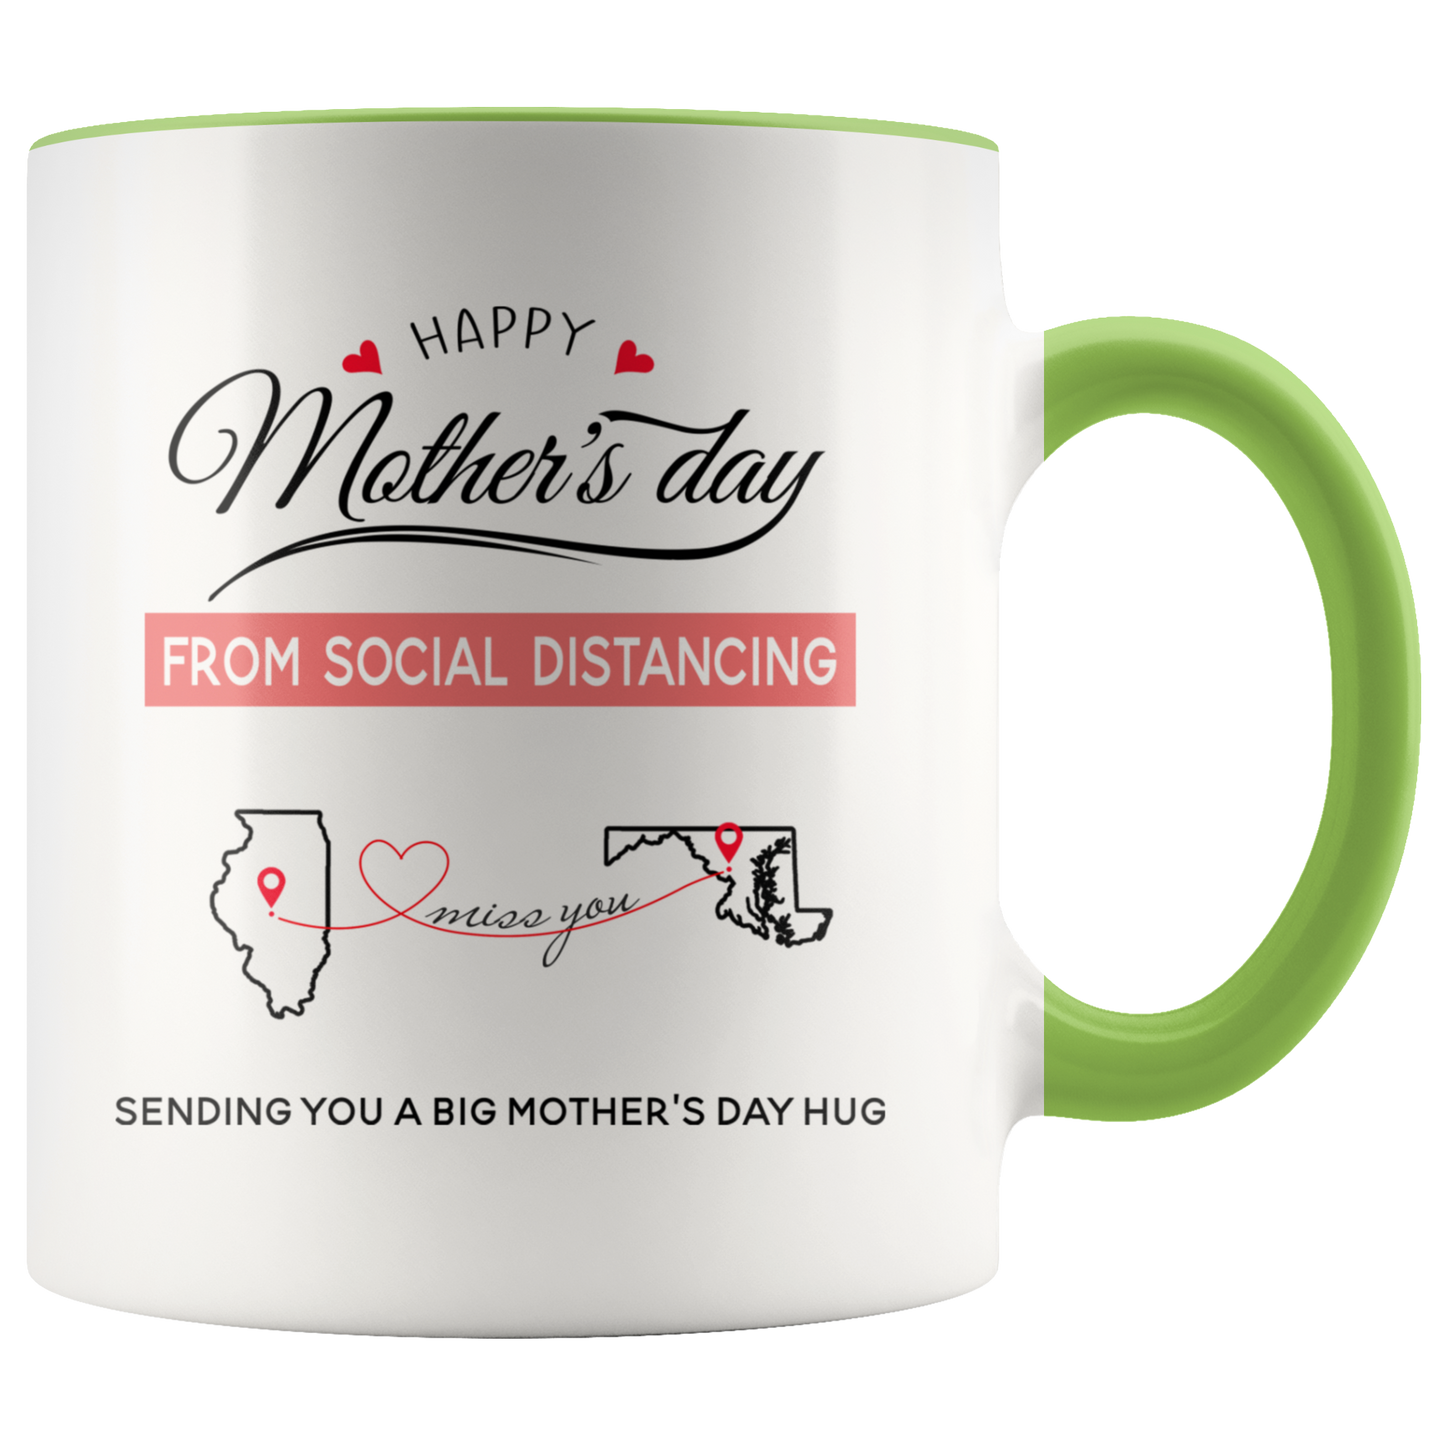 ND-21436259-sp-26371 - [ Illinois | Maryland ] (CC_Accent_Mug_) Happy Mothers Day From Social Distancing, Sending You A Big